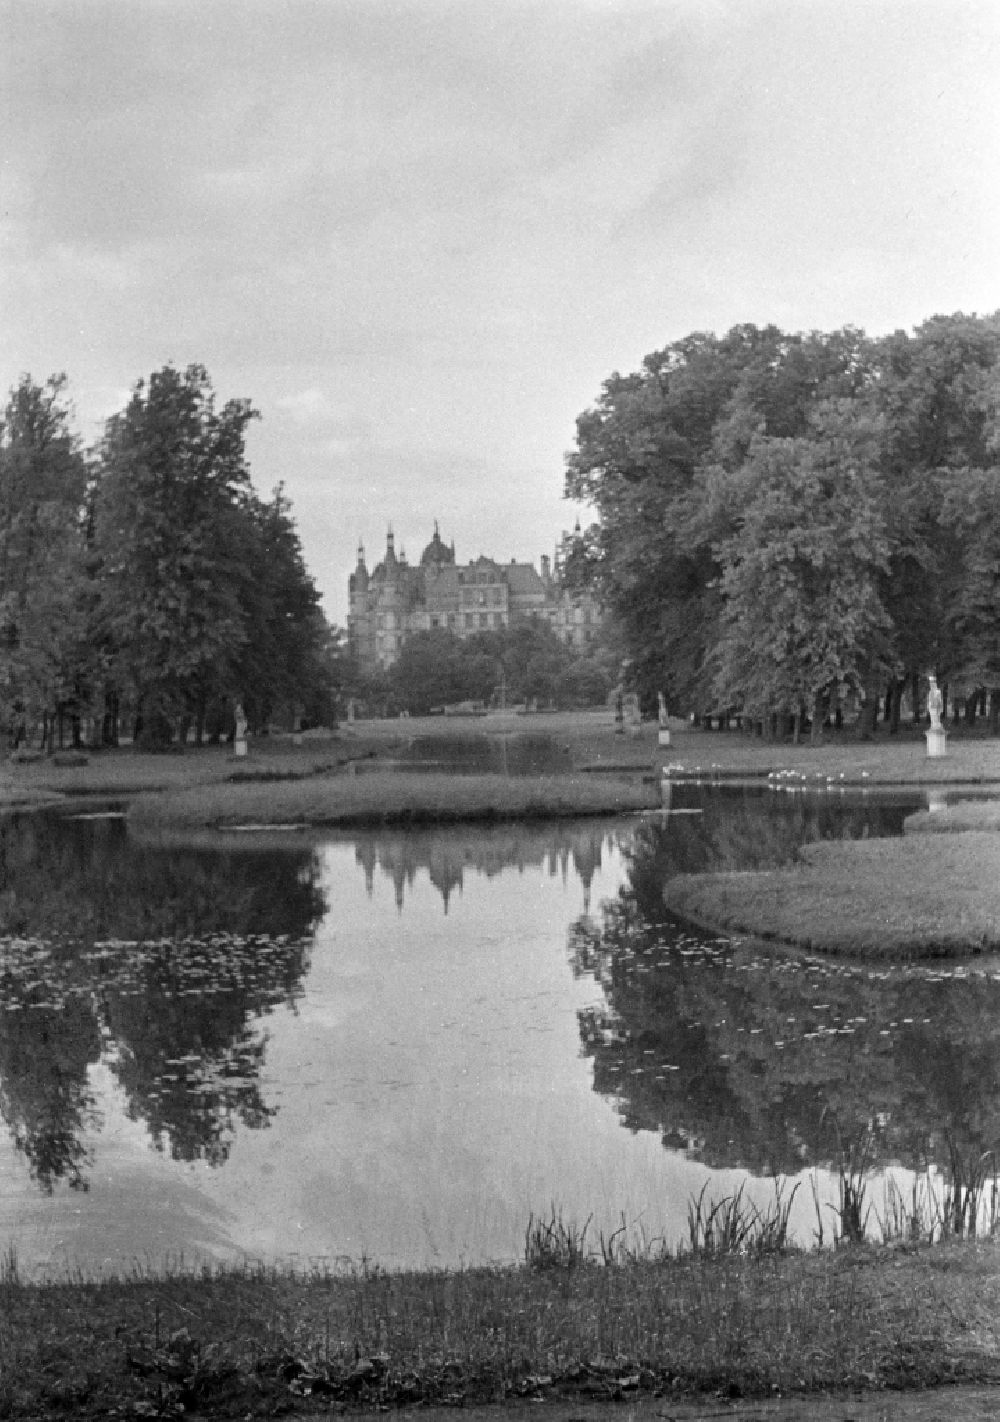 GDR photo archive: Schwerin - Shore area and water surface of the lake Burgsee on street Lennestrasse in Schwerin, Mecklenburg-Western Pomerania on the territory of the former GDR, German Democratic Republic